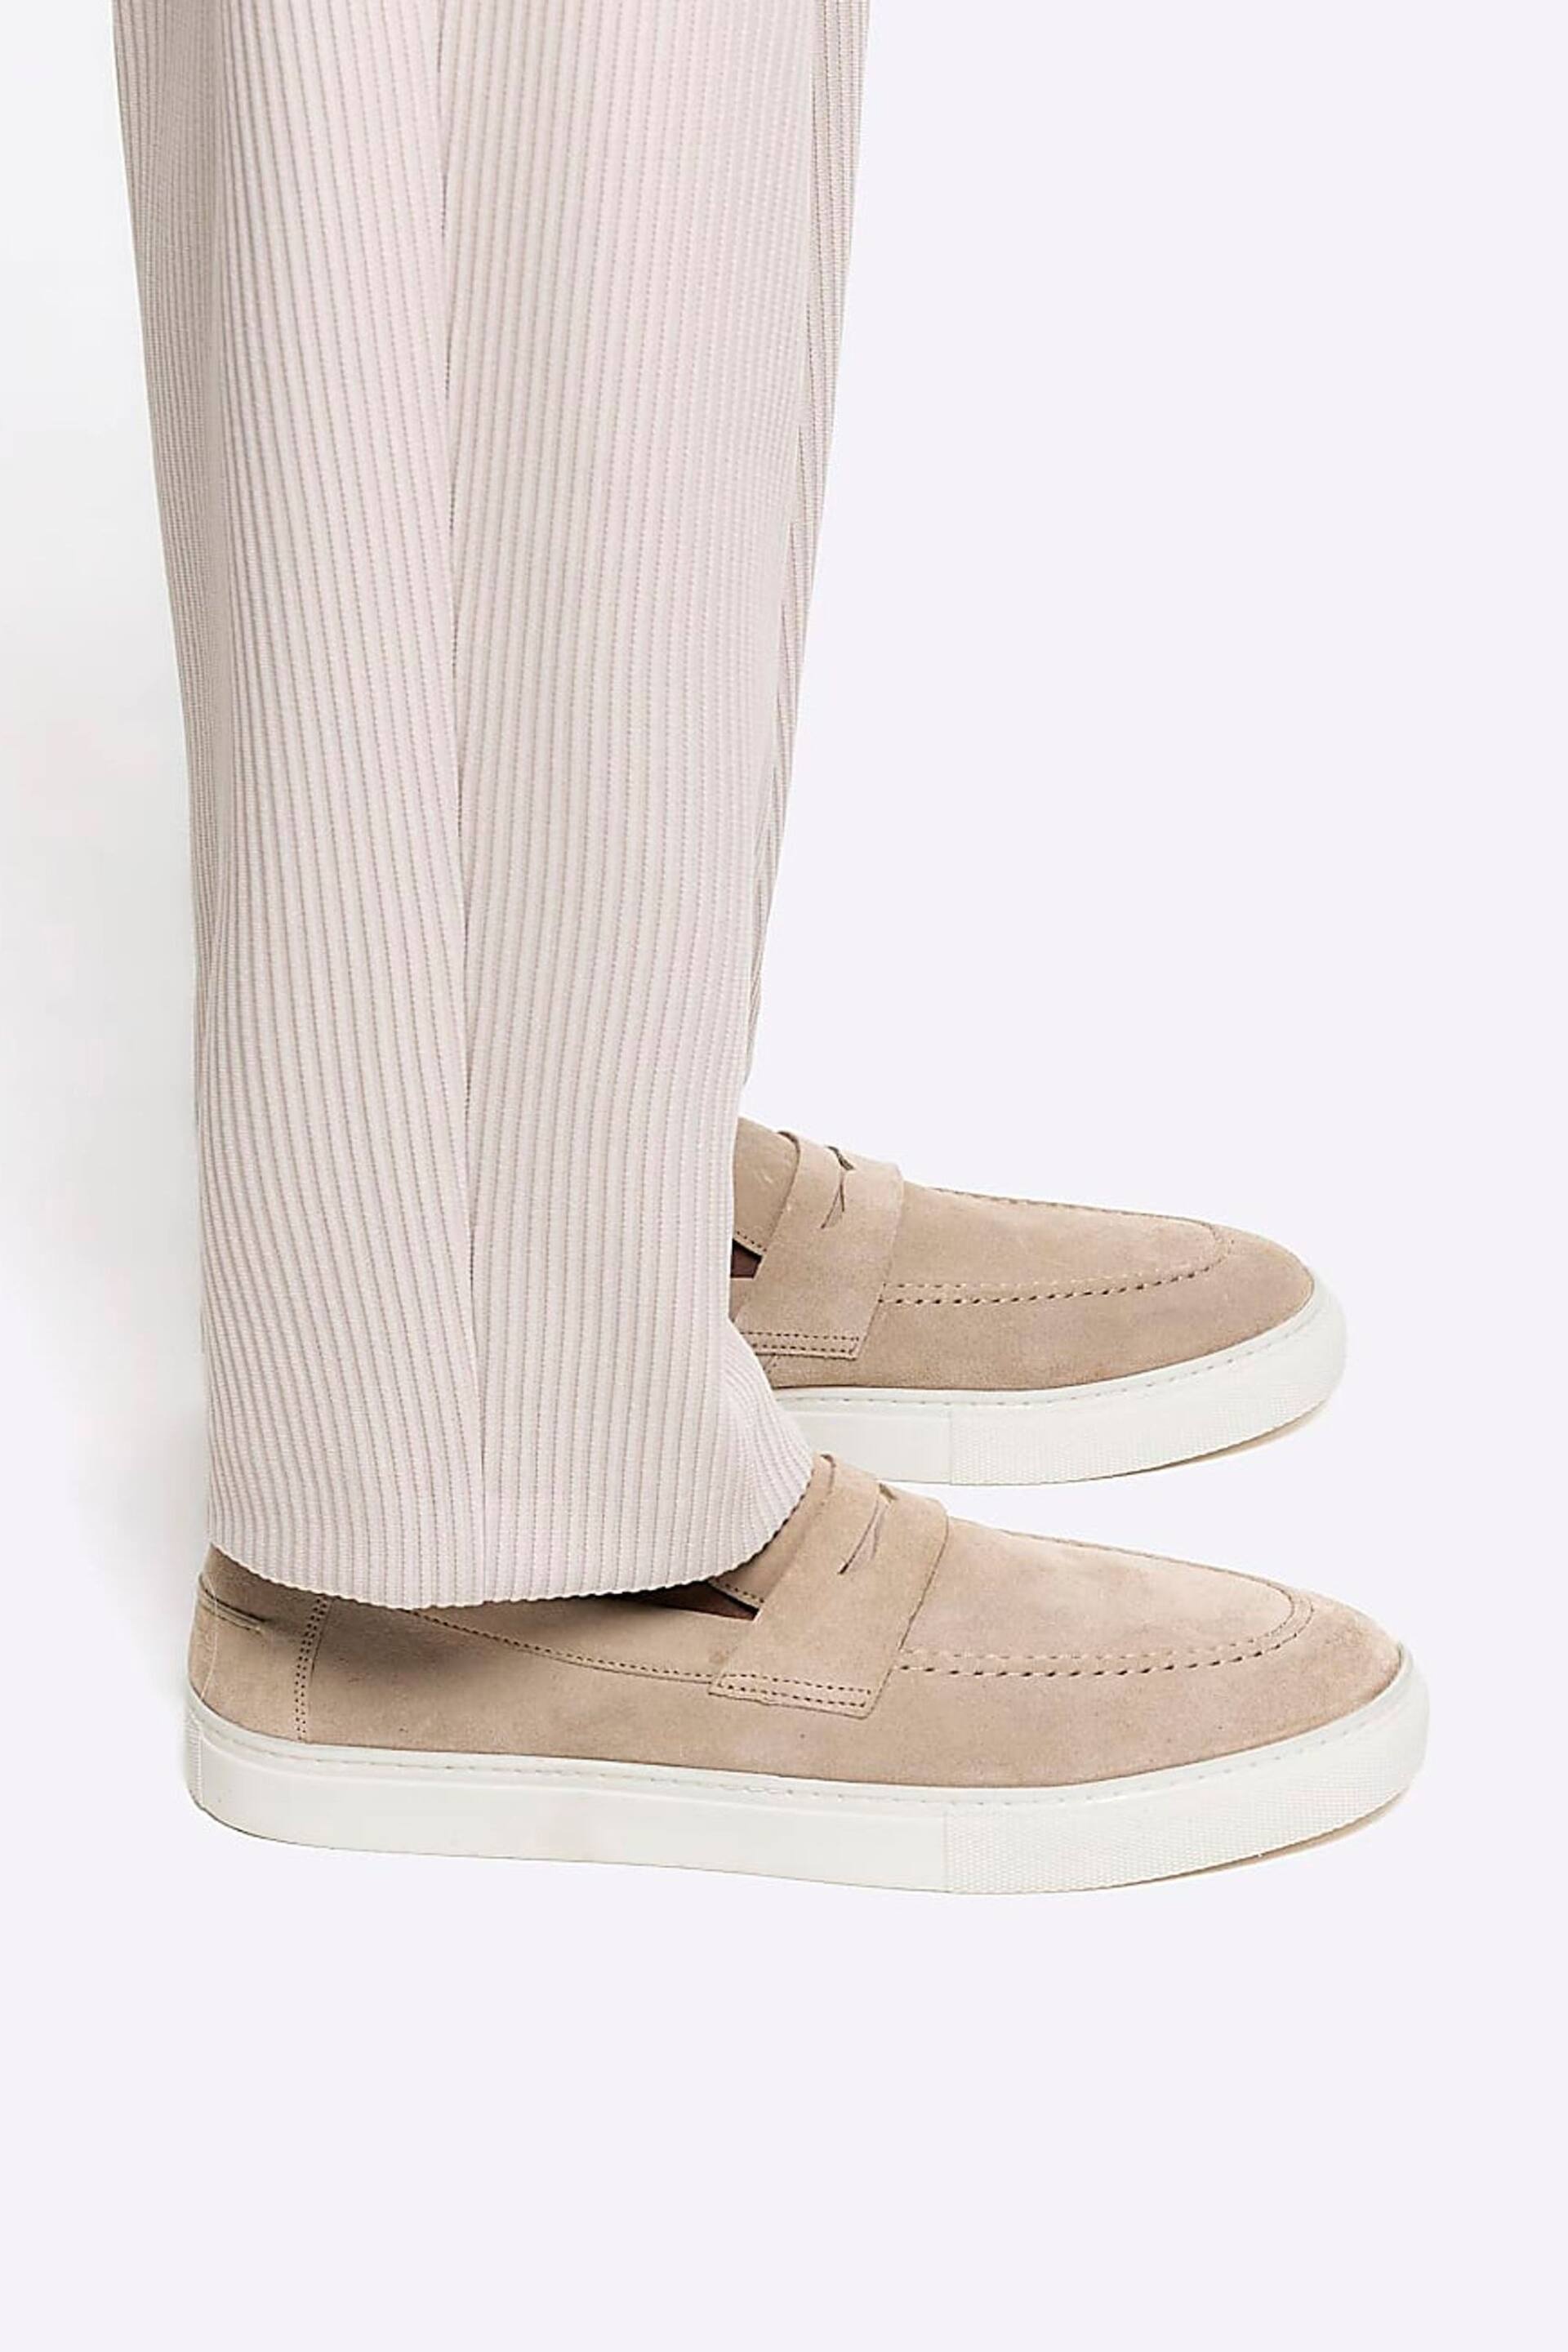 River Island Beige Suede Loafers - Image 2 of 6